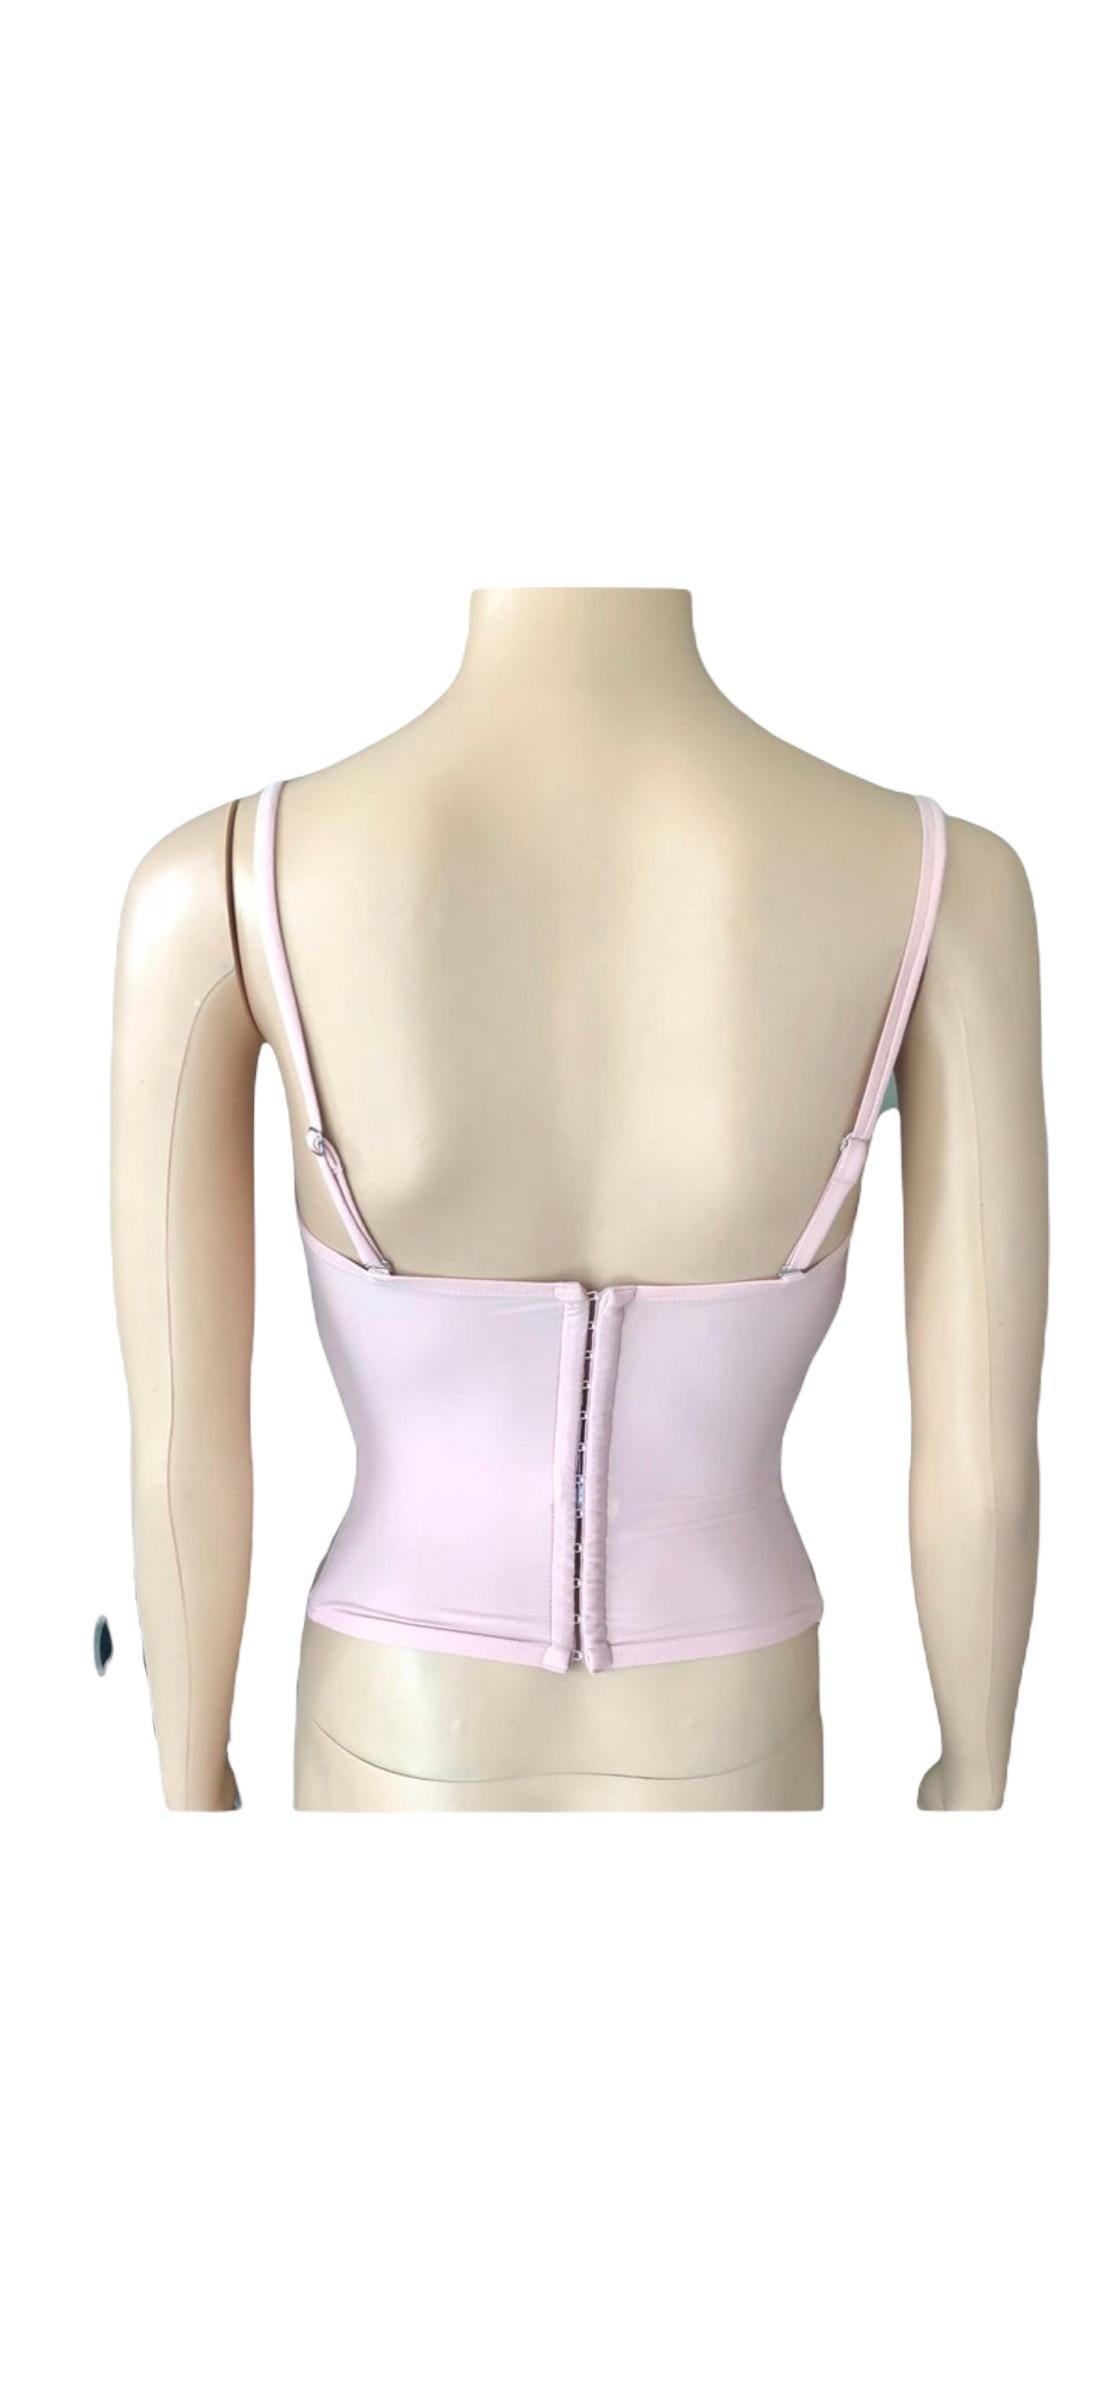 Christian Dior By John Galliano S/S 2006 Unworn Bustier Lace Corset Crop Top For Sale 5